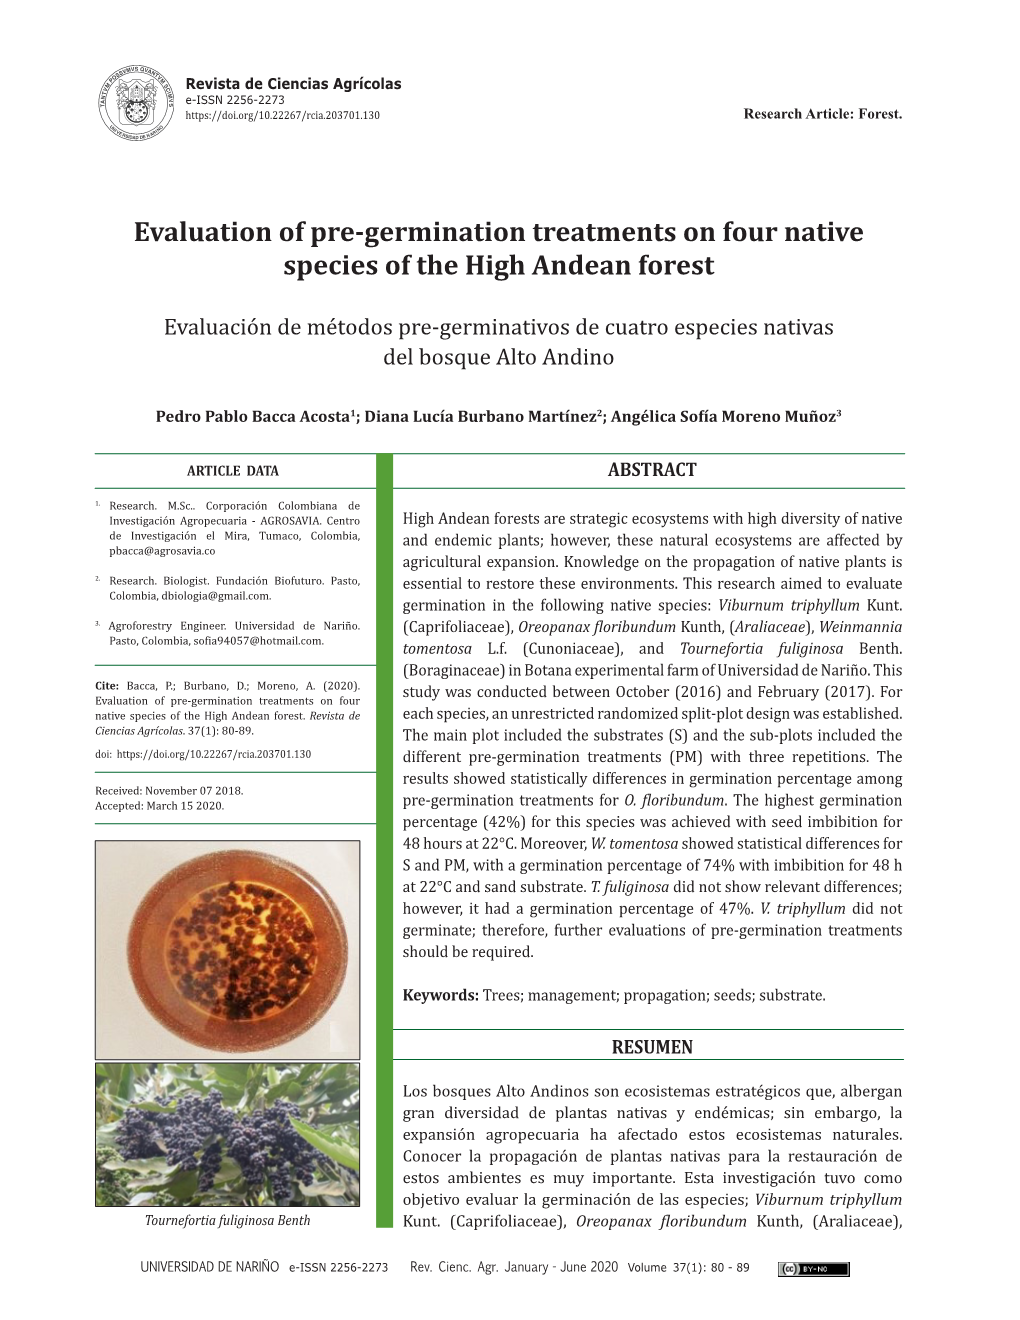 Evaluation of Pre-Germination Treatments on Four Native Species of the High Andean Forest